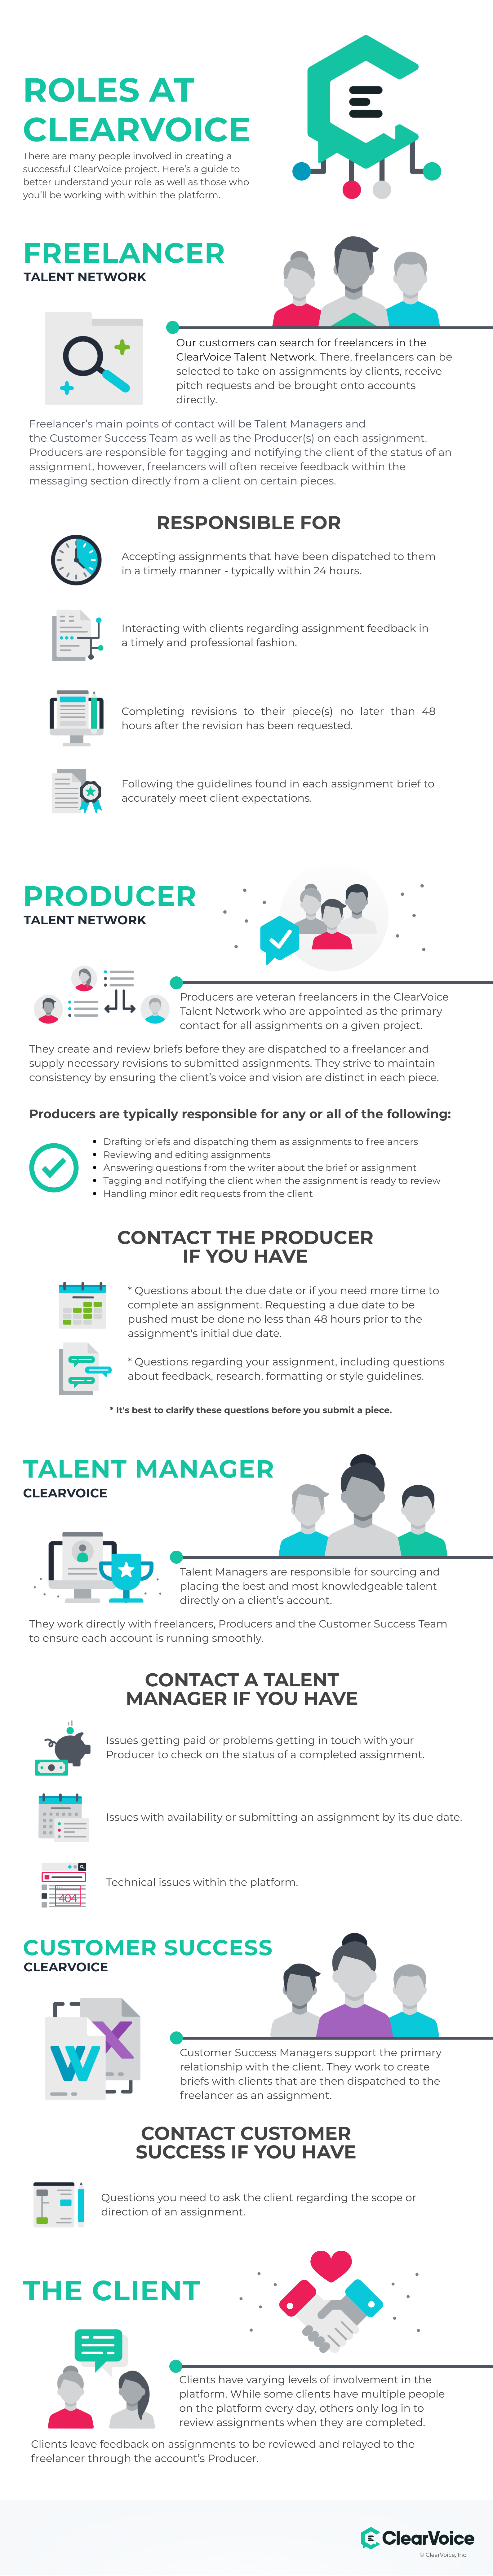 ClearVoice roles infographic